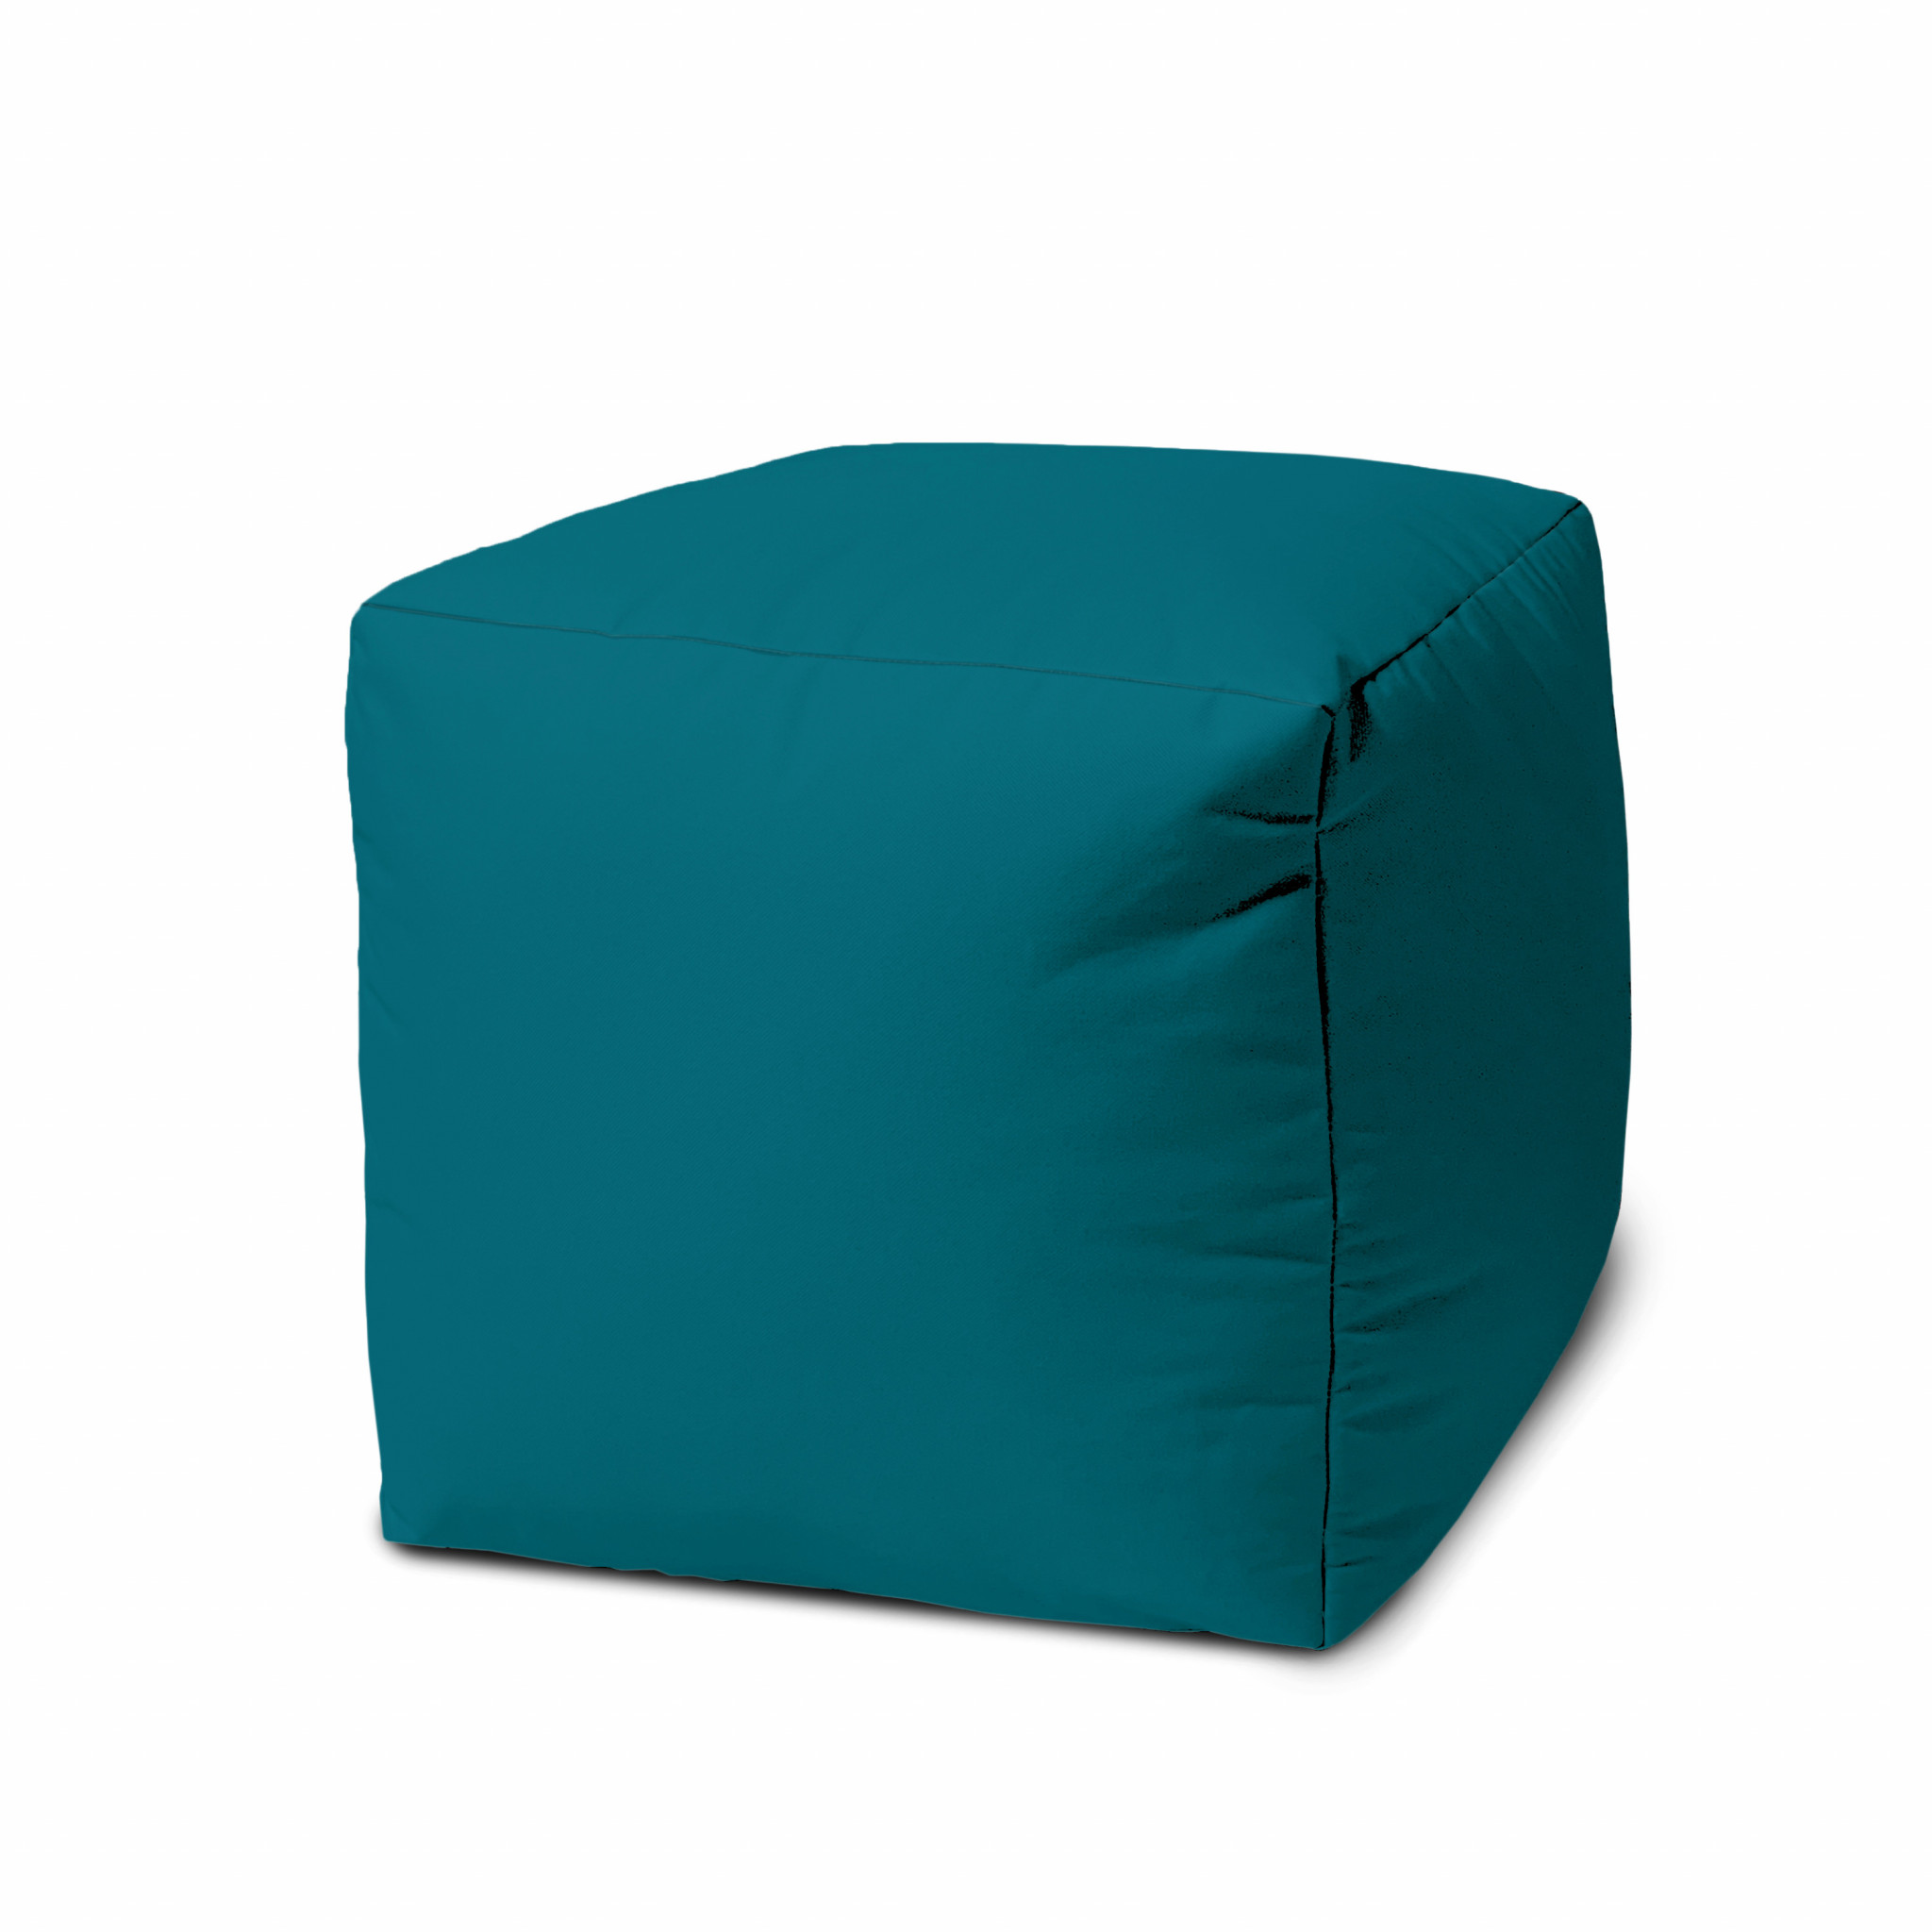 17" Cool Dark Teal Solid Color Indoor Outdoor Pouf Cover-474976-1